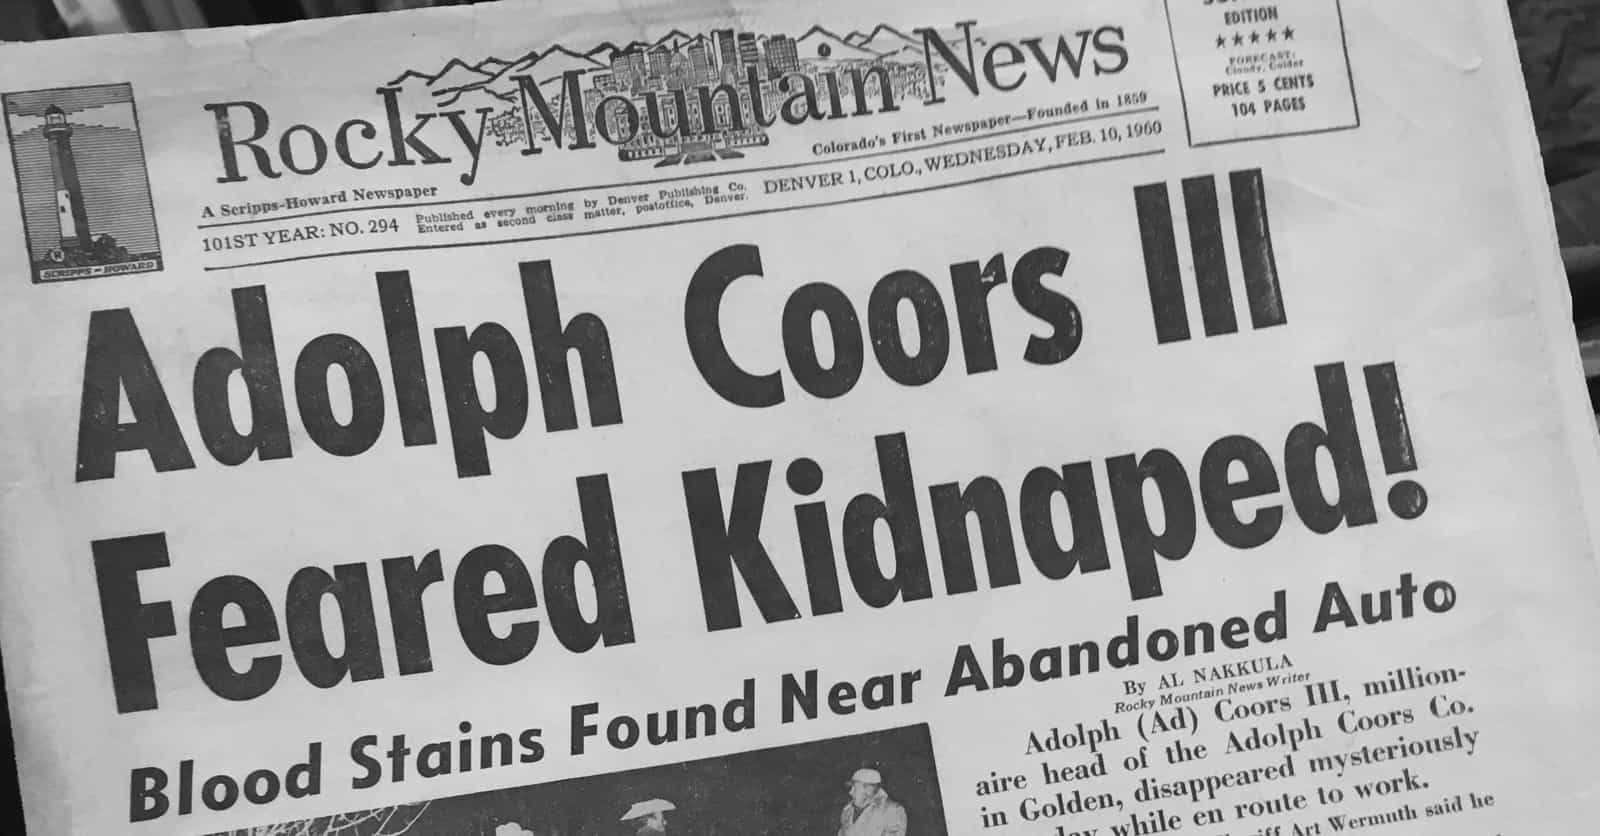 The Murder Of Beer Mogul Adolph Coors III Launched The FBI's Biggest Manhunt In Decades